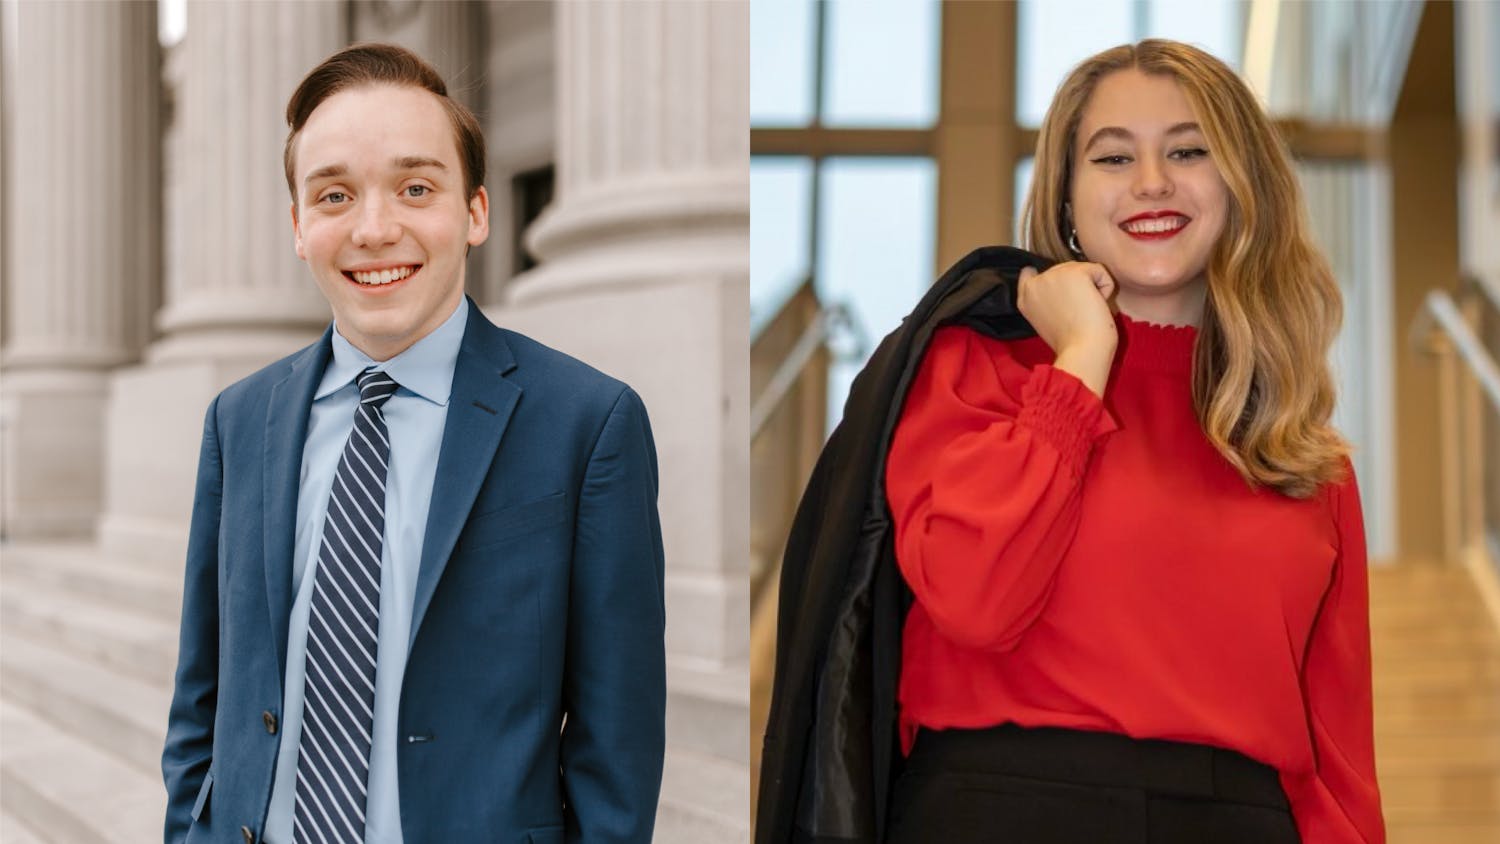 Cameron Eubanks (left) and Jordyn Vélez (right) are the candidates running to be the next speaker of the student senate. Students can vote for candidates from Feb. 21 at 9 a.m. to Feb. 22 at 5 p.m.&nbsp;